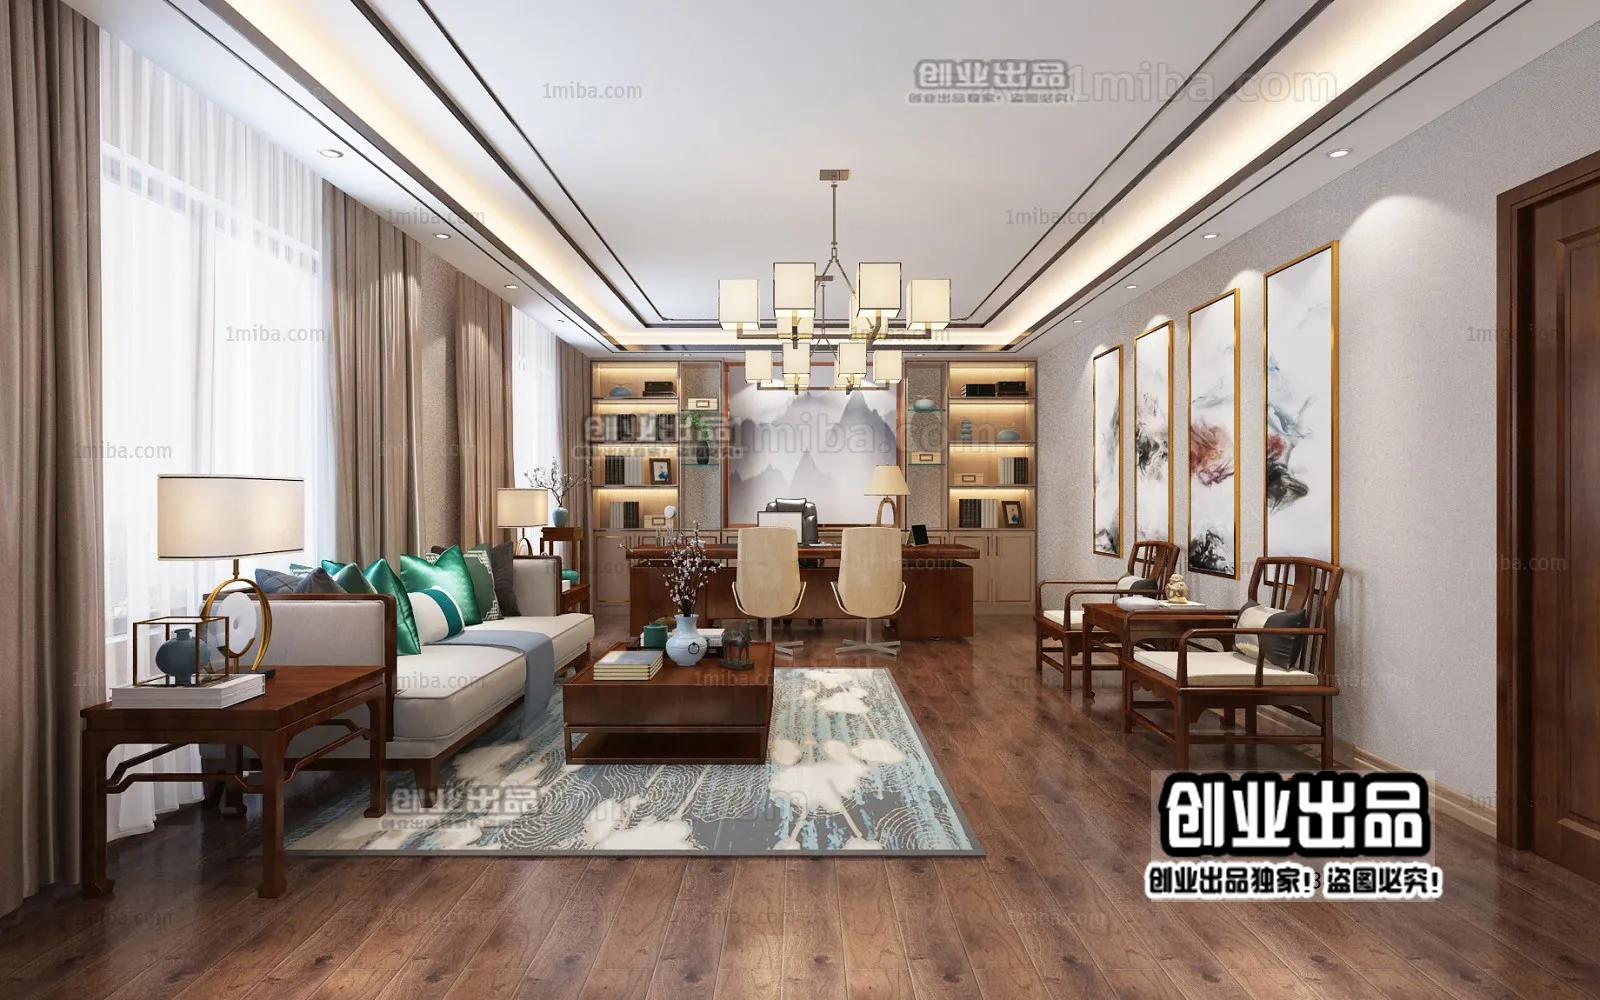 3D OFFICE INTERIOR (VRAY) – MANAGER ROOM 3D SCENES – 182